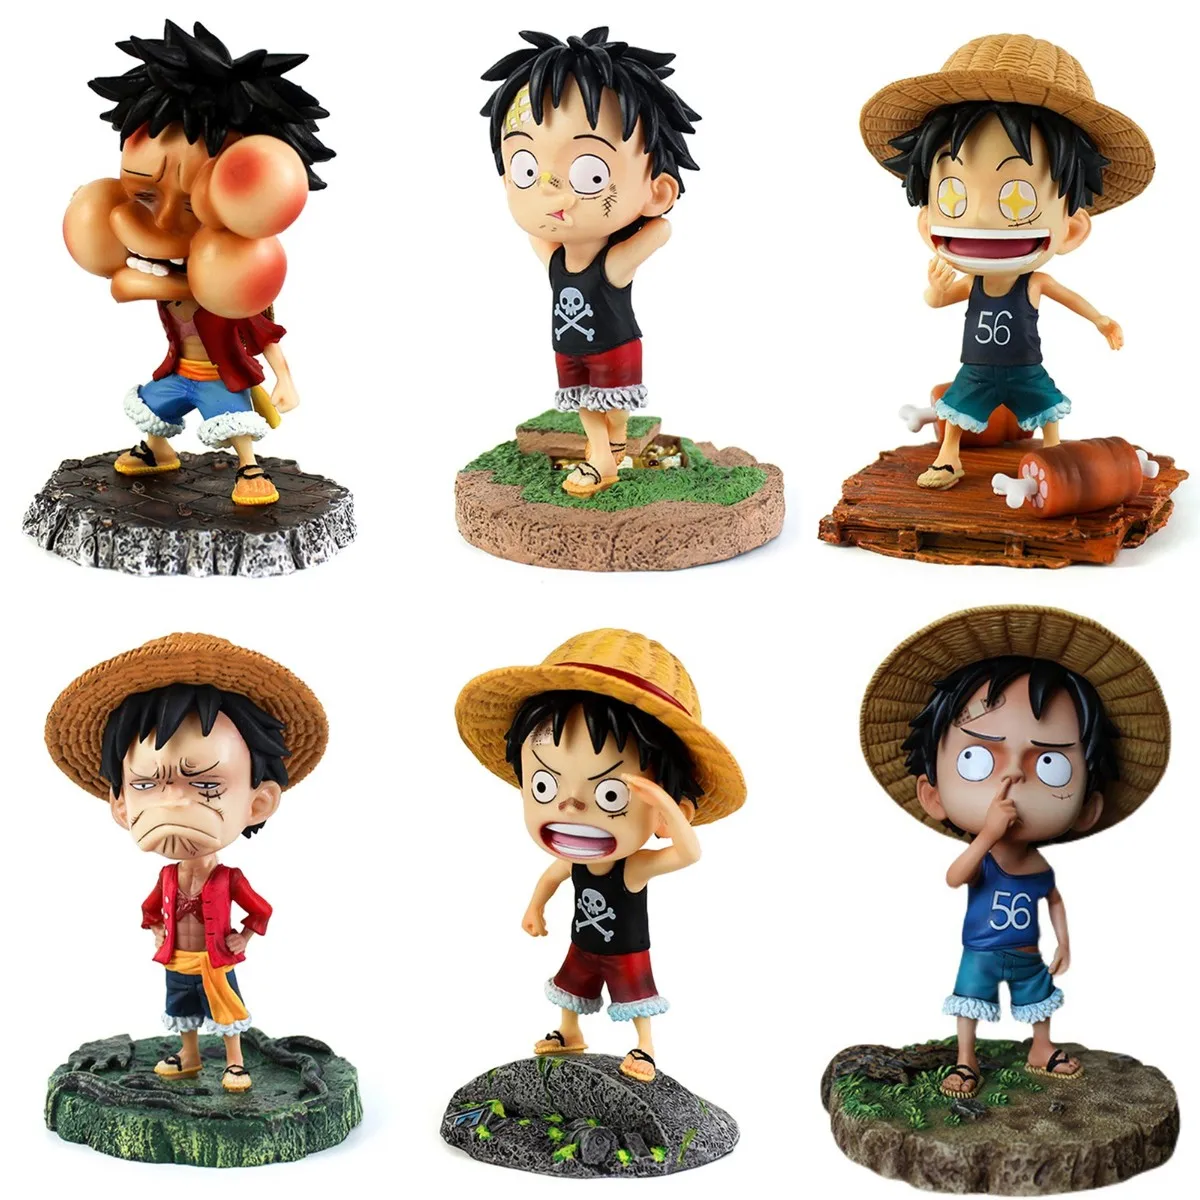 

15CM Anime One Piece Action Figure Monkey D Luffy Childhood Funny Q Version Young Luff Figurine Pvc Collectible Model Toy Gift